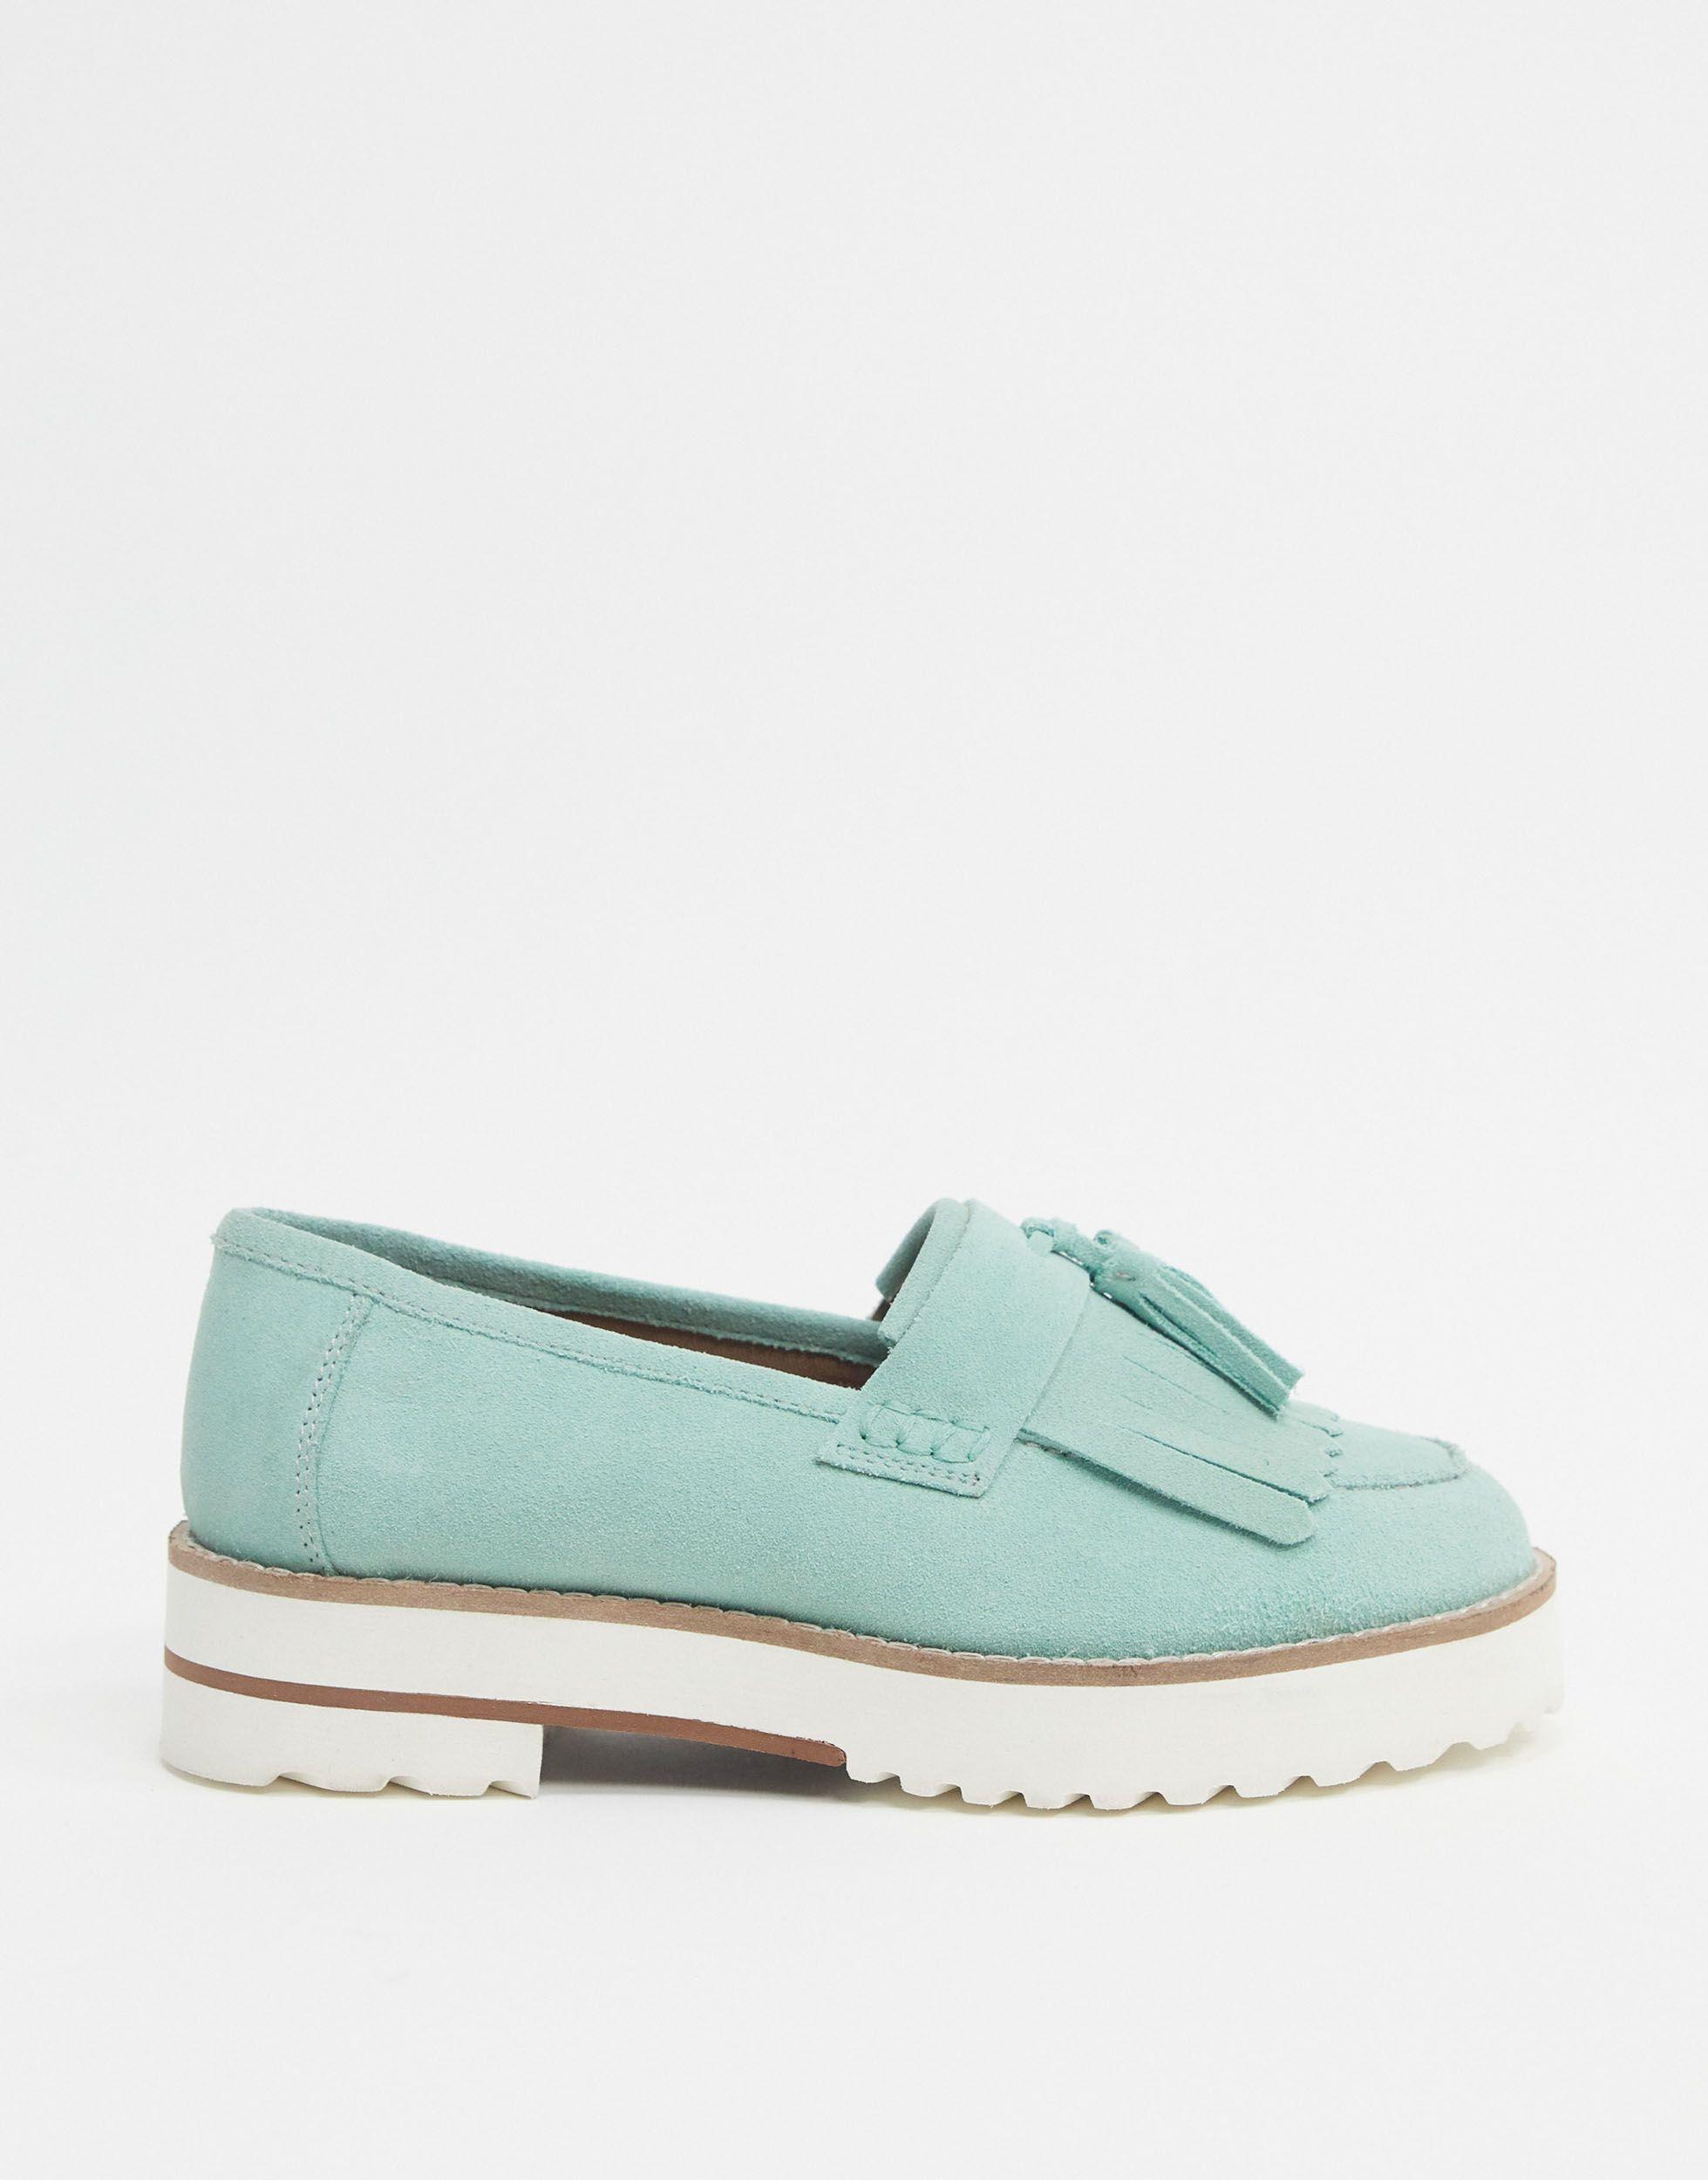 ASOS Wide Fit Meze Chunky Fringed Suede Loafers - Lyst